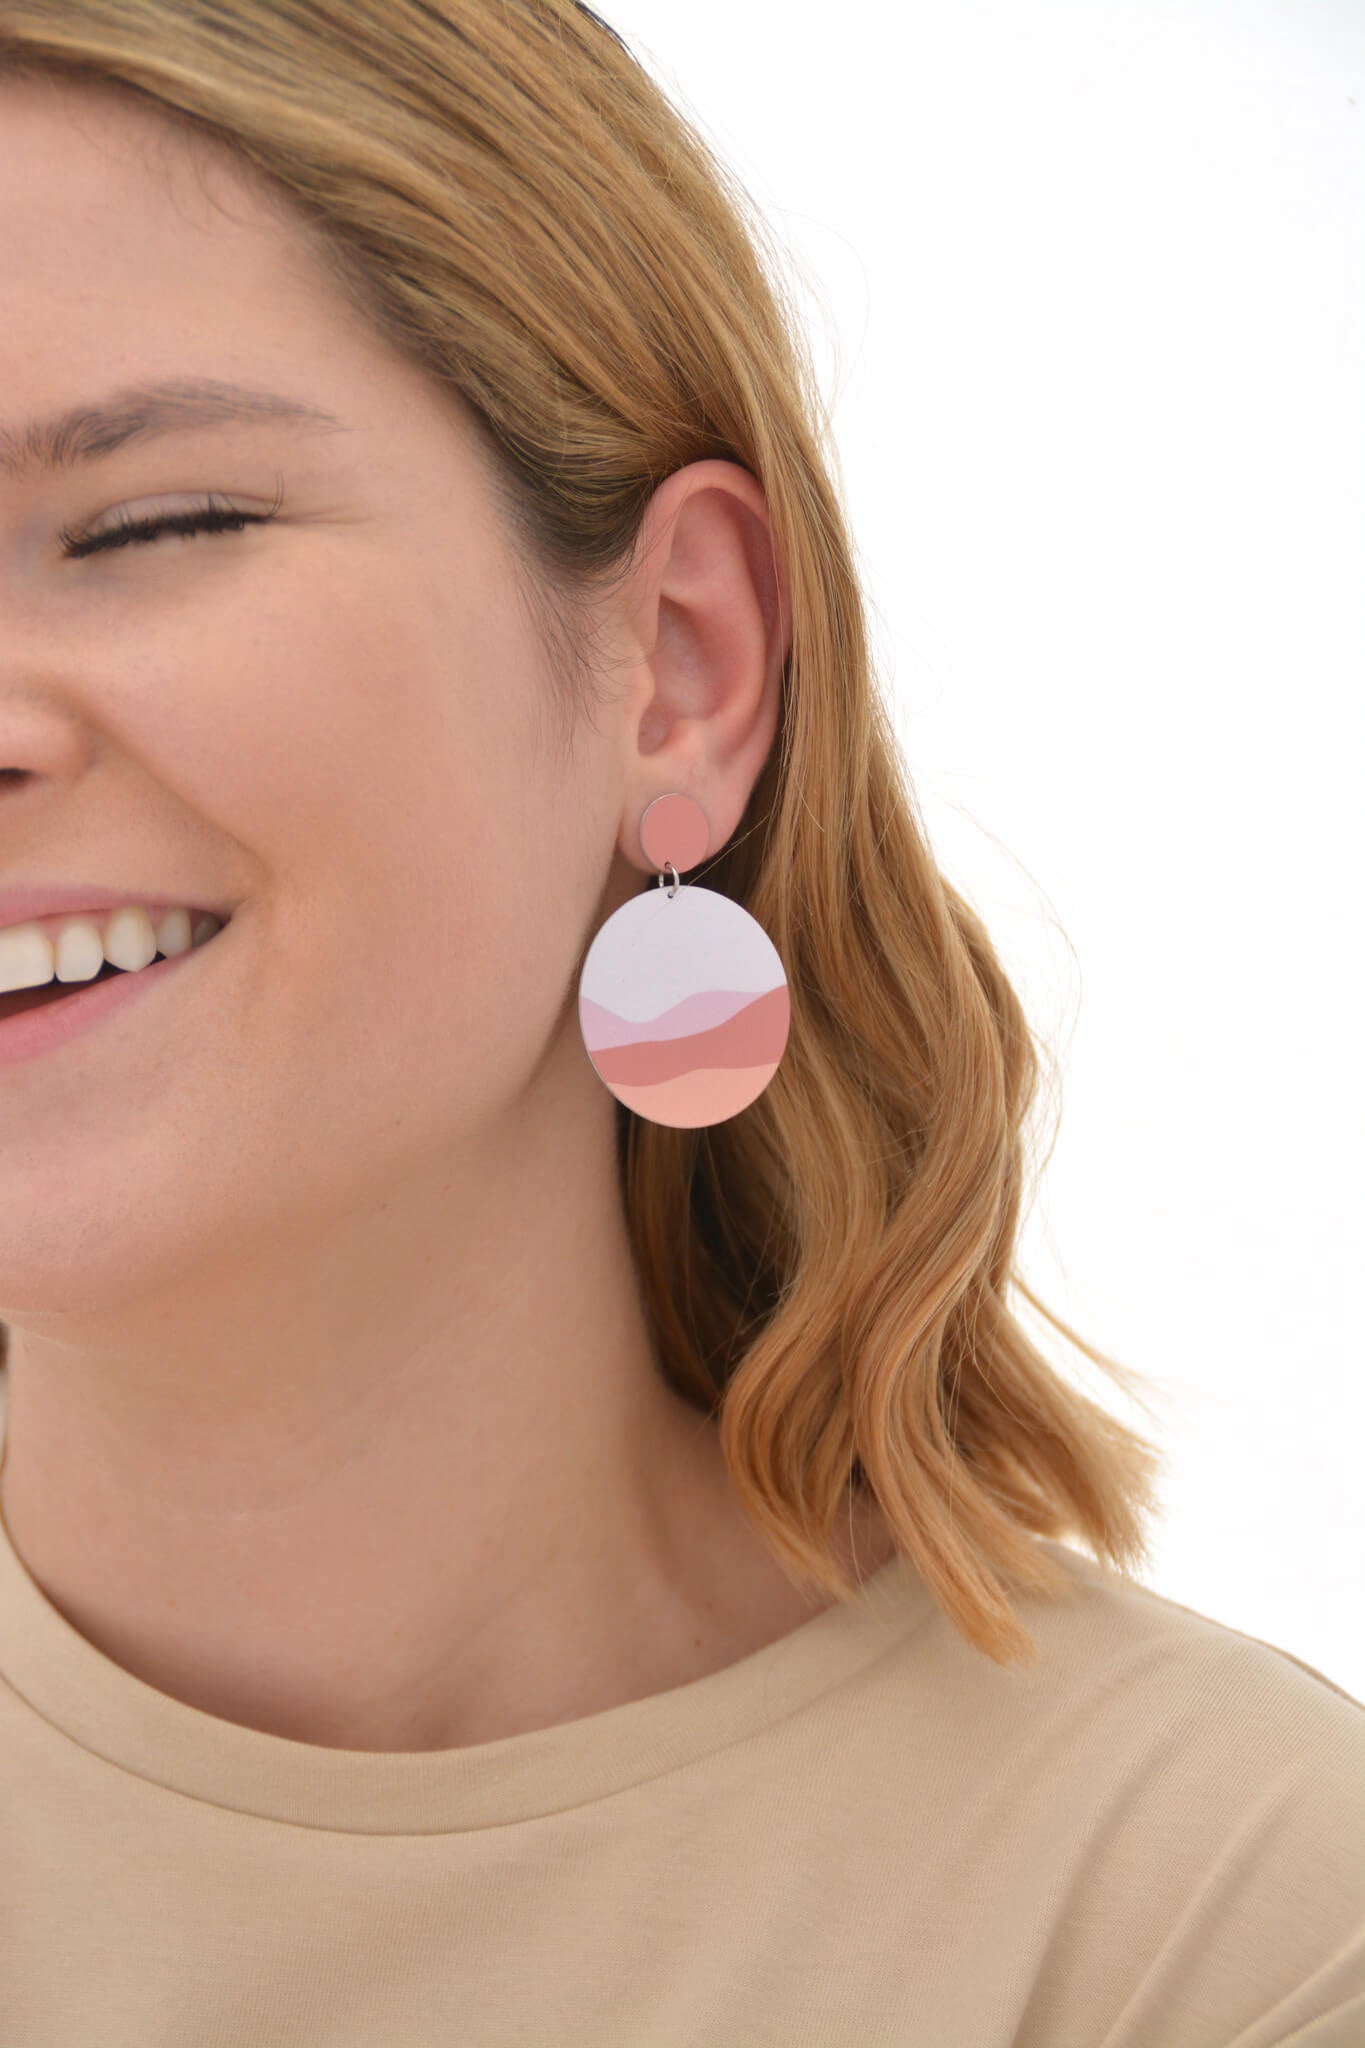 The image shows a woman wearing a Kitty Came Home large circle drop stud earring in her left ear. The top stud is 12 millimetres in diameter and the lower dangle circle is 36 millimetre in diameter. The design is waiting for the sun by Satin and Tat. Pale pink and orange forms create a landscape of rolling hills beneath a pale pink sky.